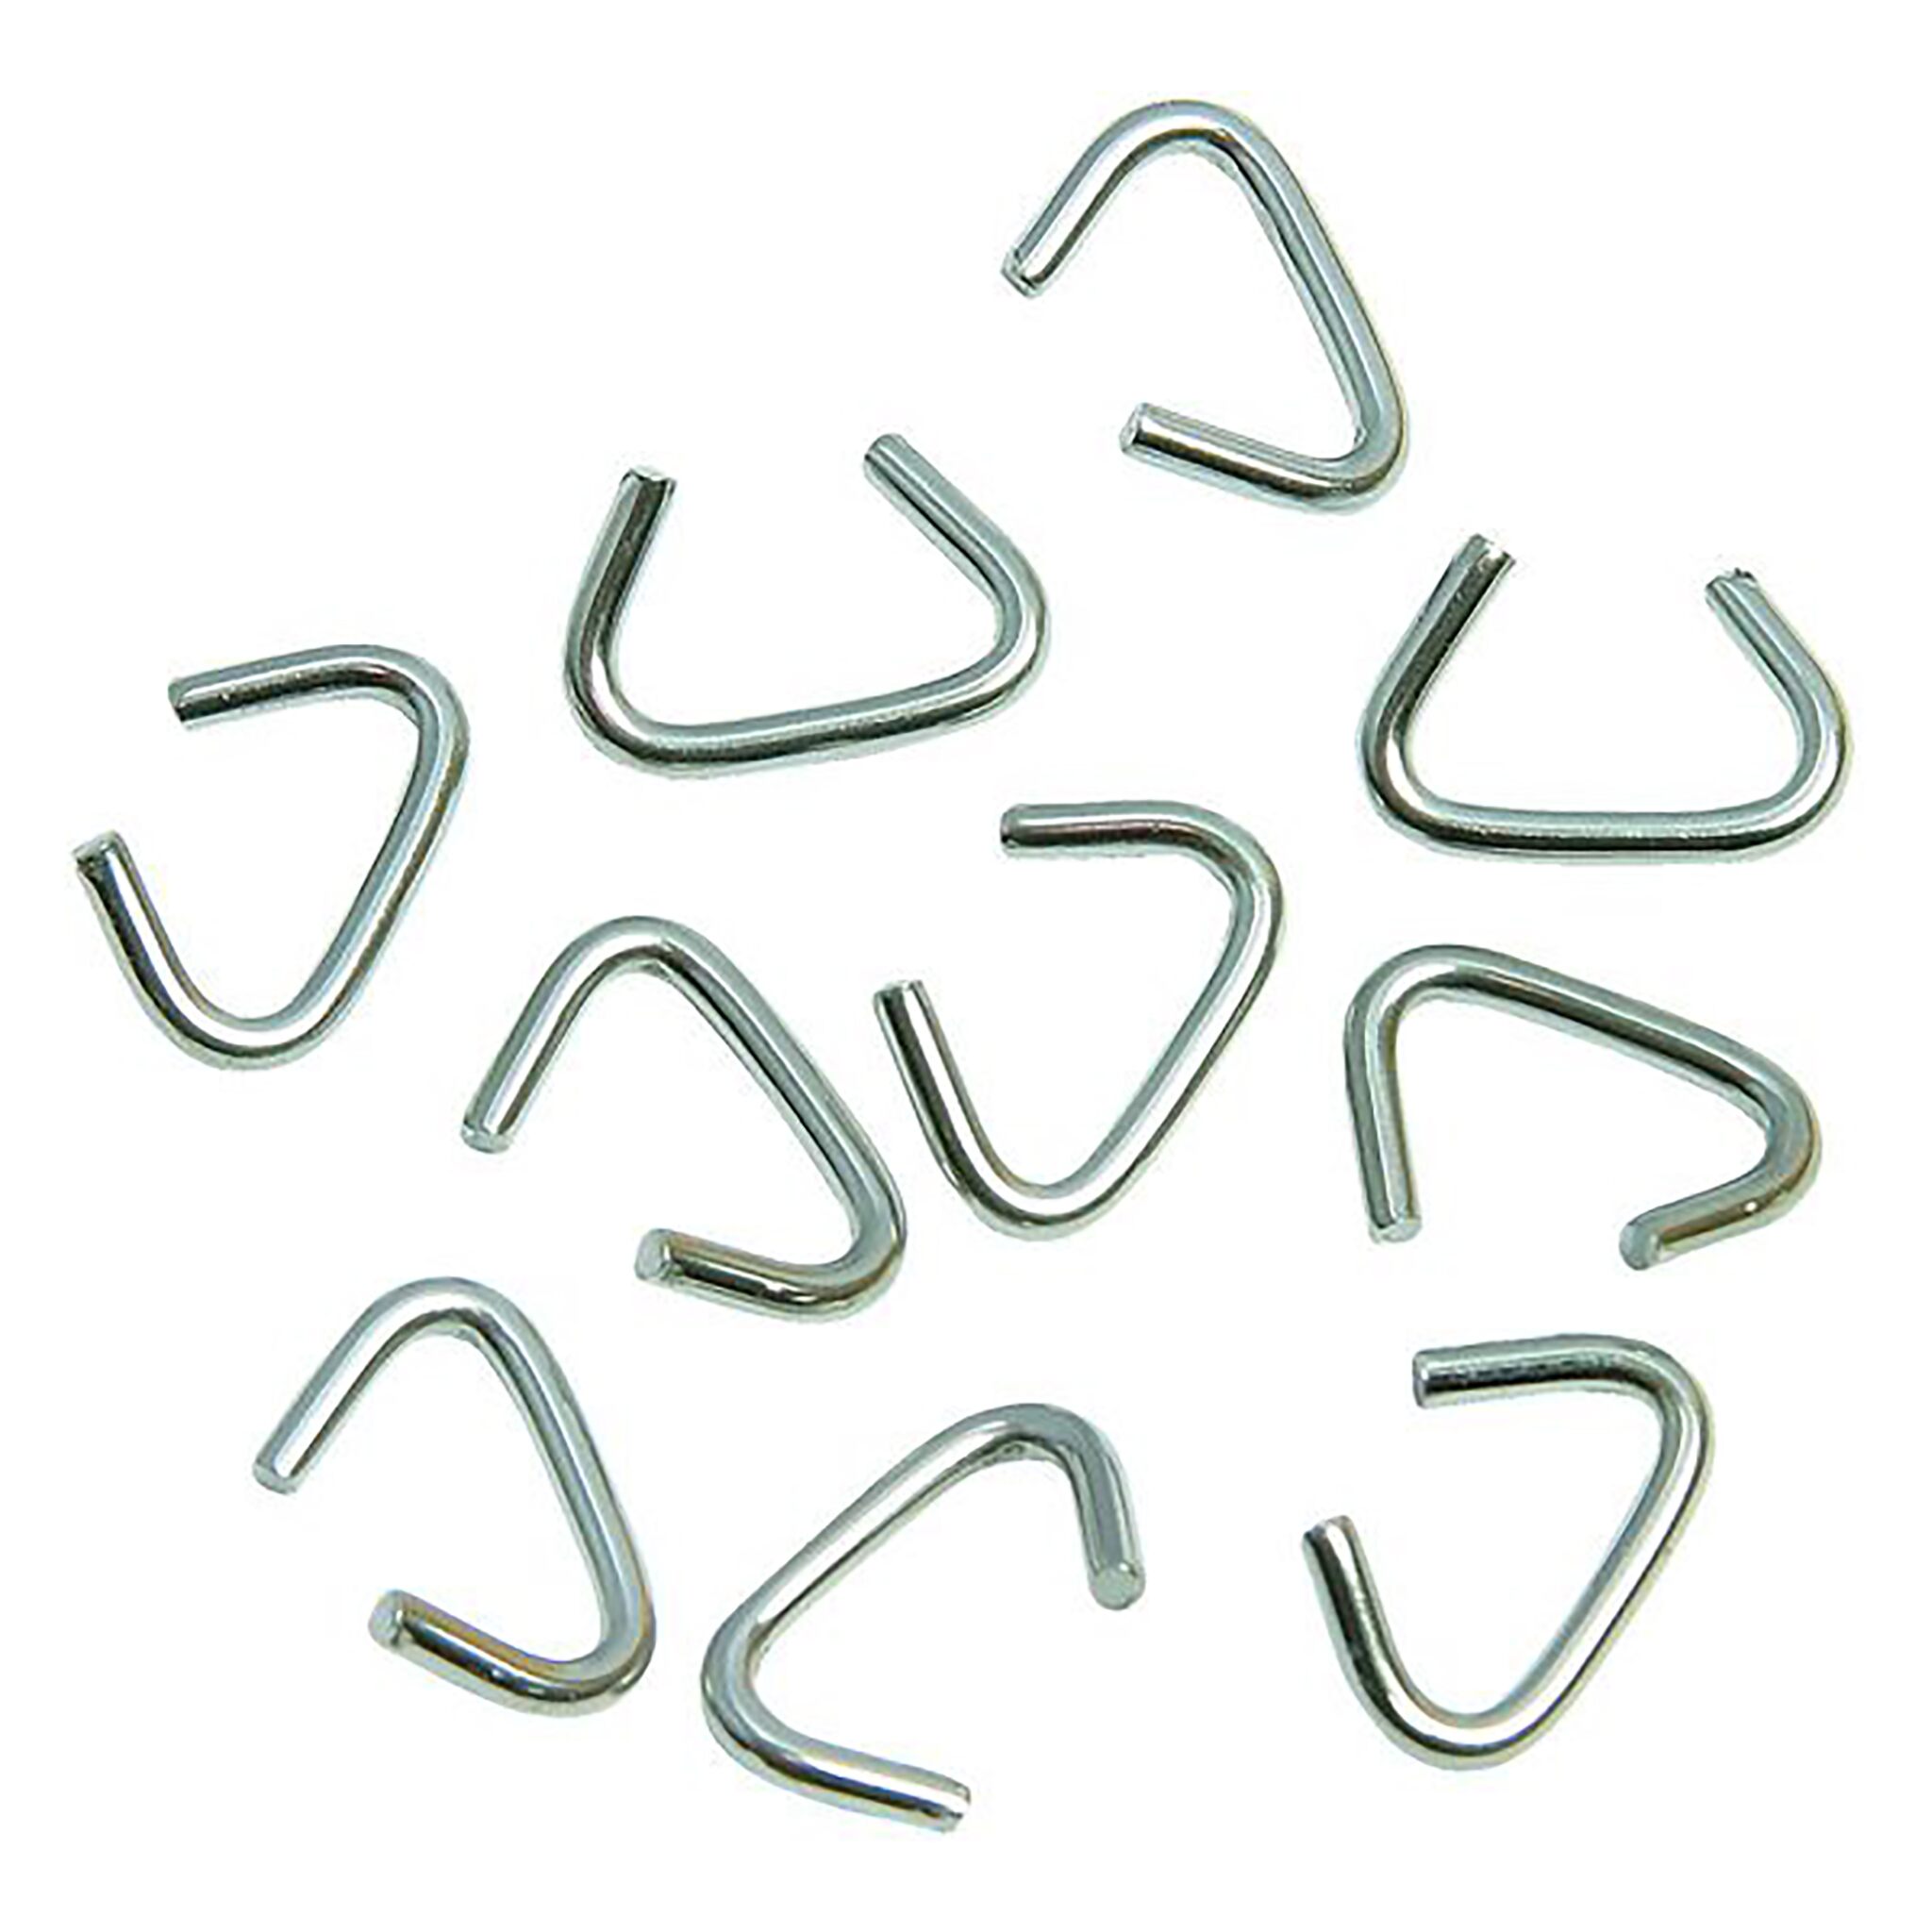 Stainless steel clips for rubber rope